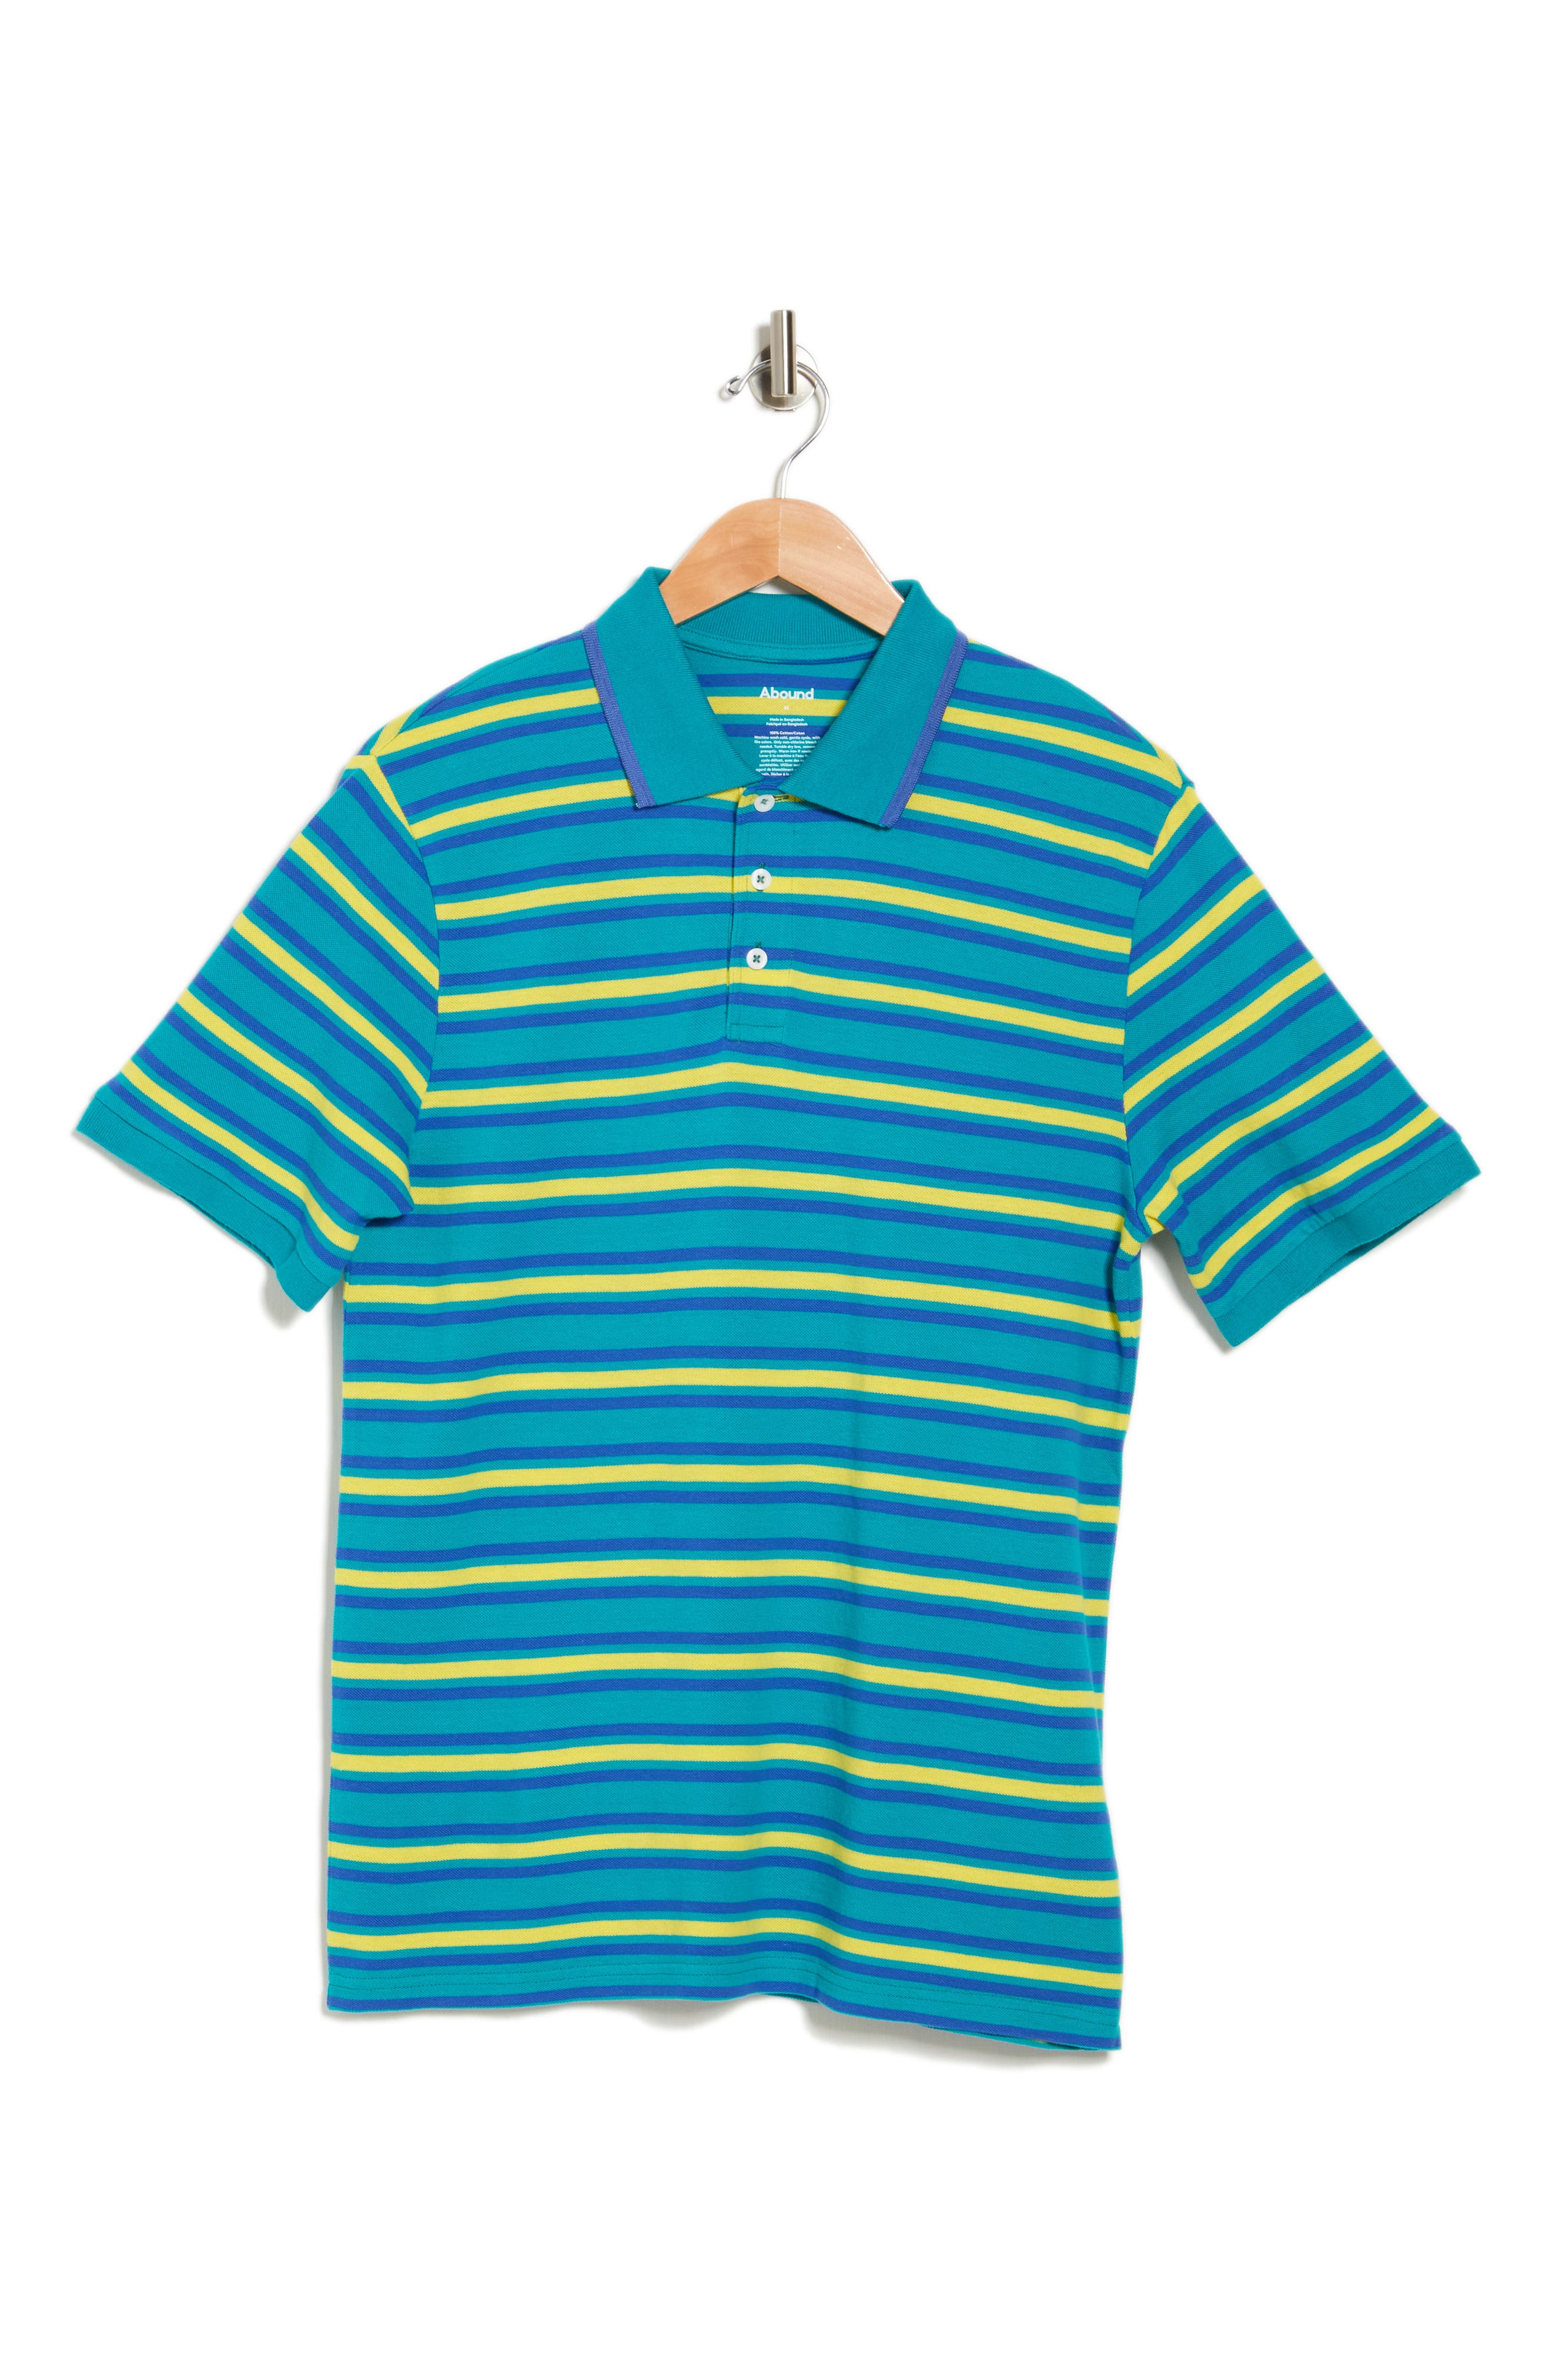 Abound Short Sleeve Polo Shirt In Teal Compass Stripe